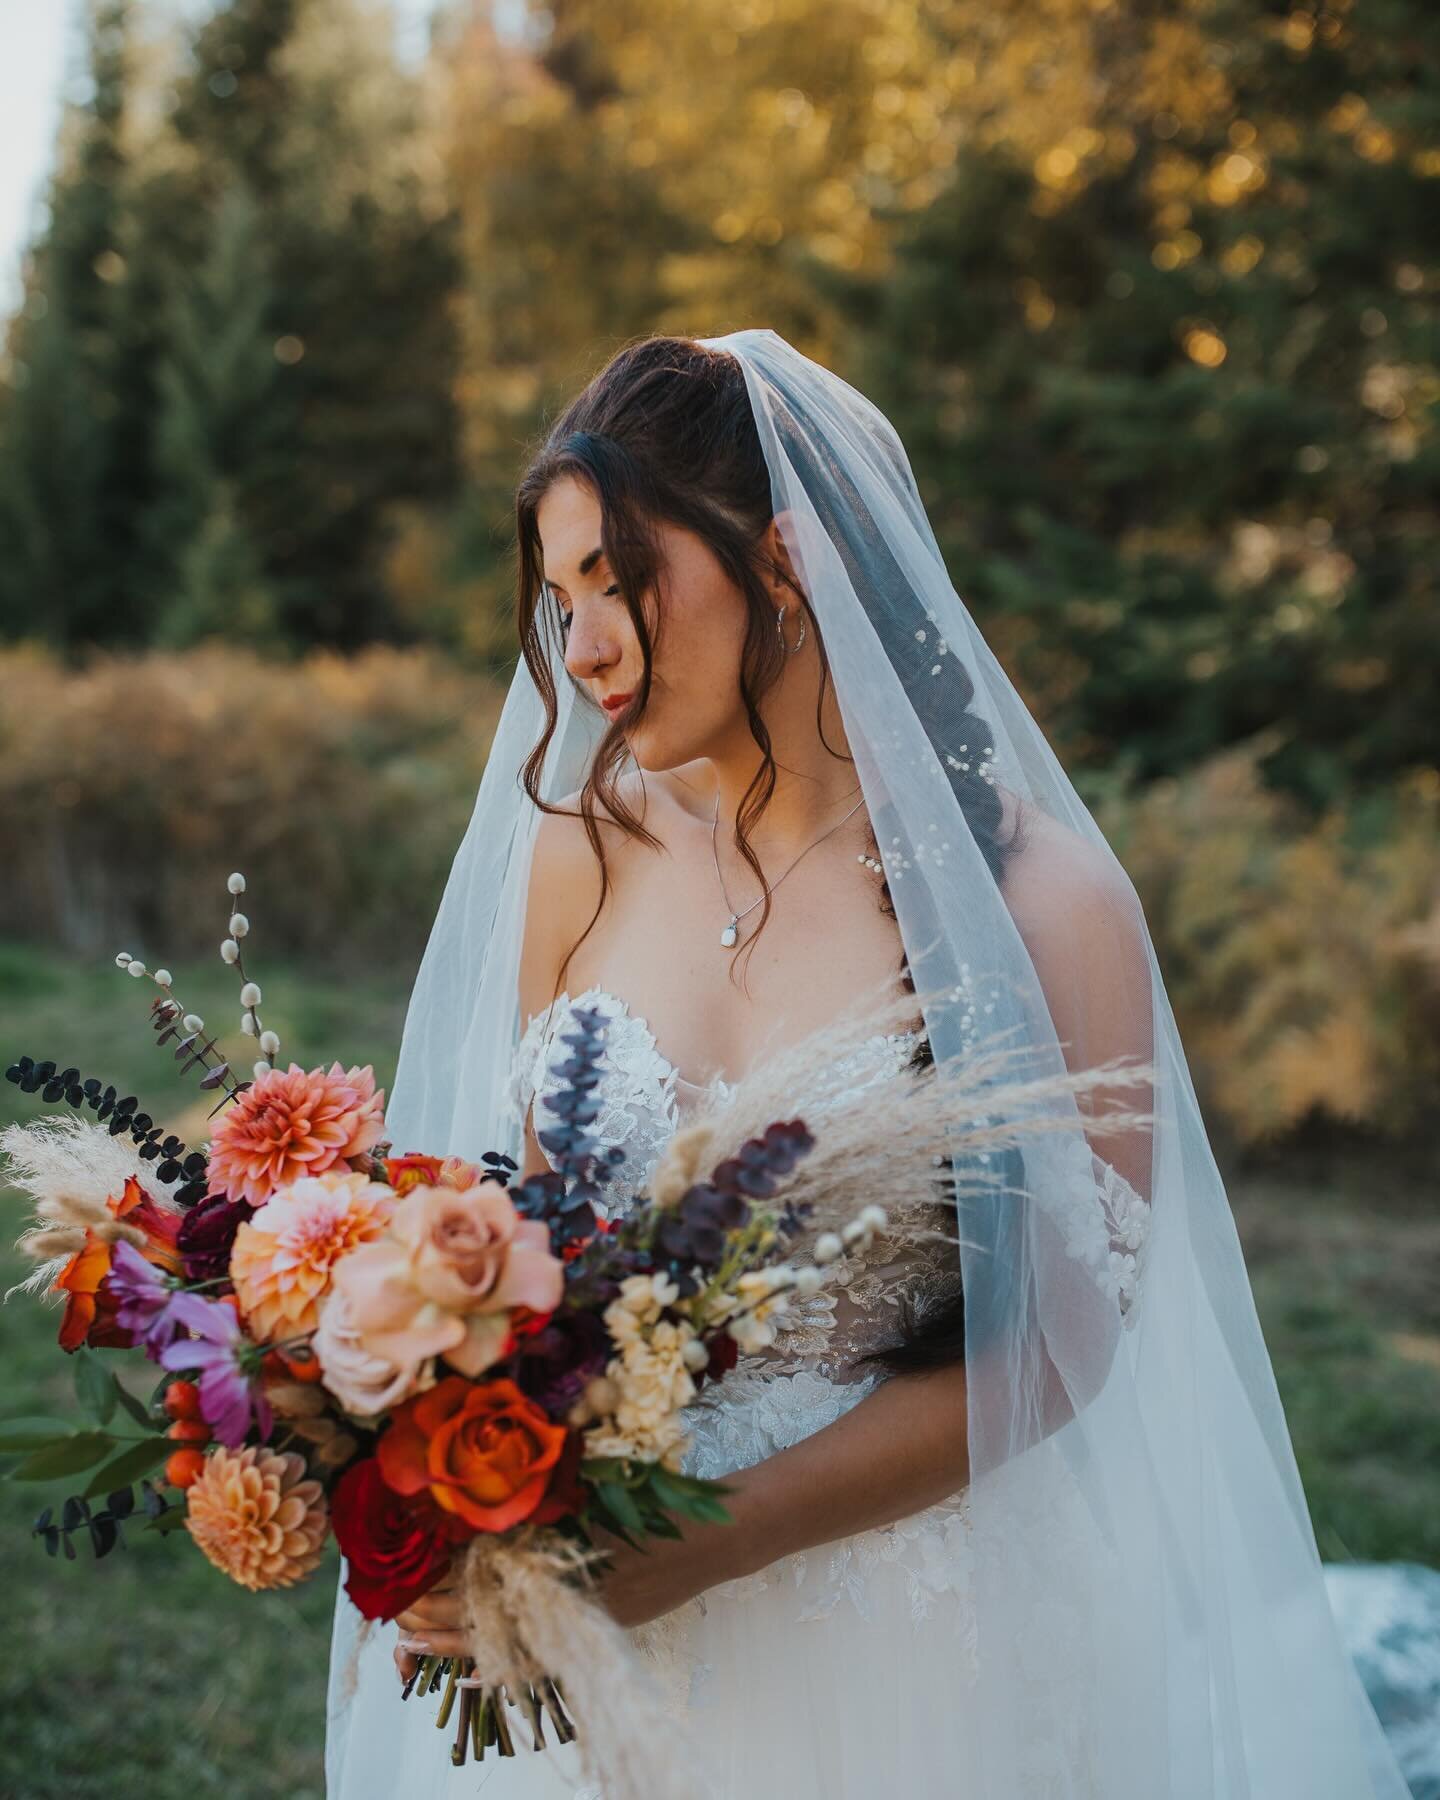 As a photographer, capturing the breathtaking beauty of a bride on her special day is an honor. The stunning floral bouquet and delicate baby&rsquo;s breath in her hair added a touch of enchantment to this unforgettable moment. ✨

Second shooter for 